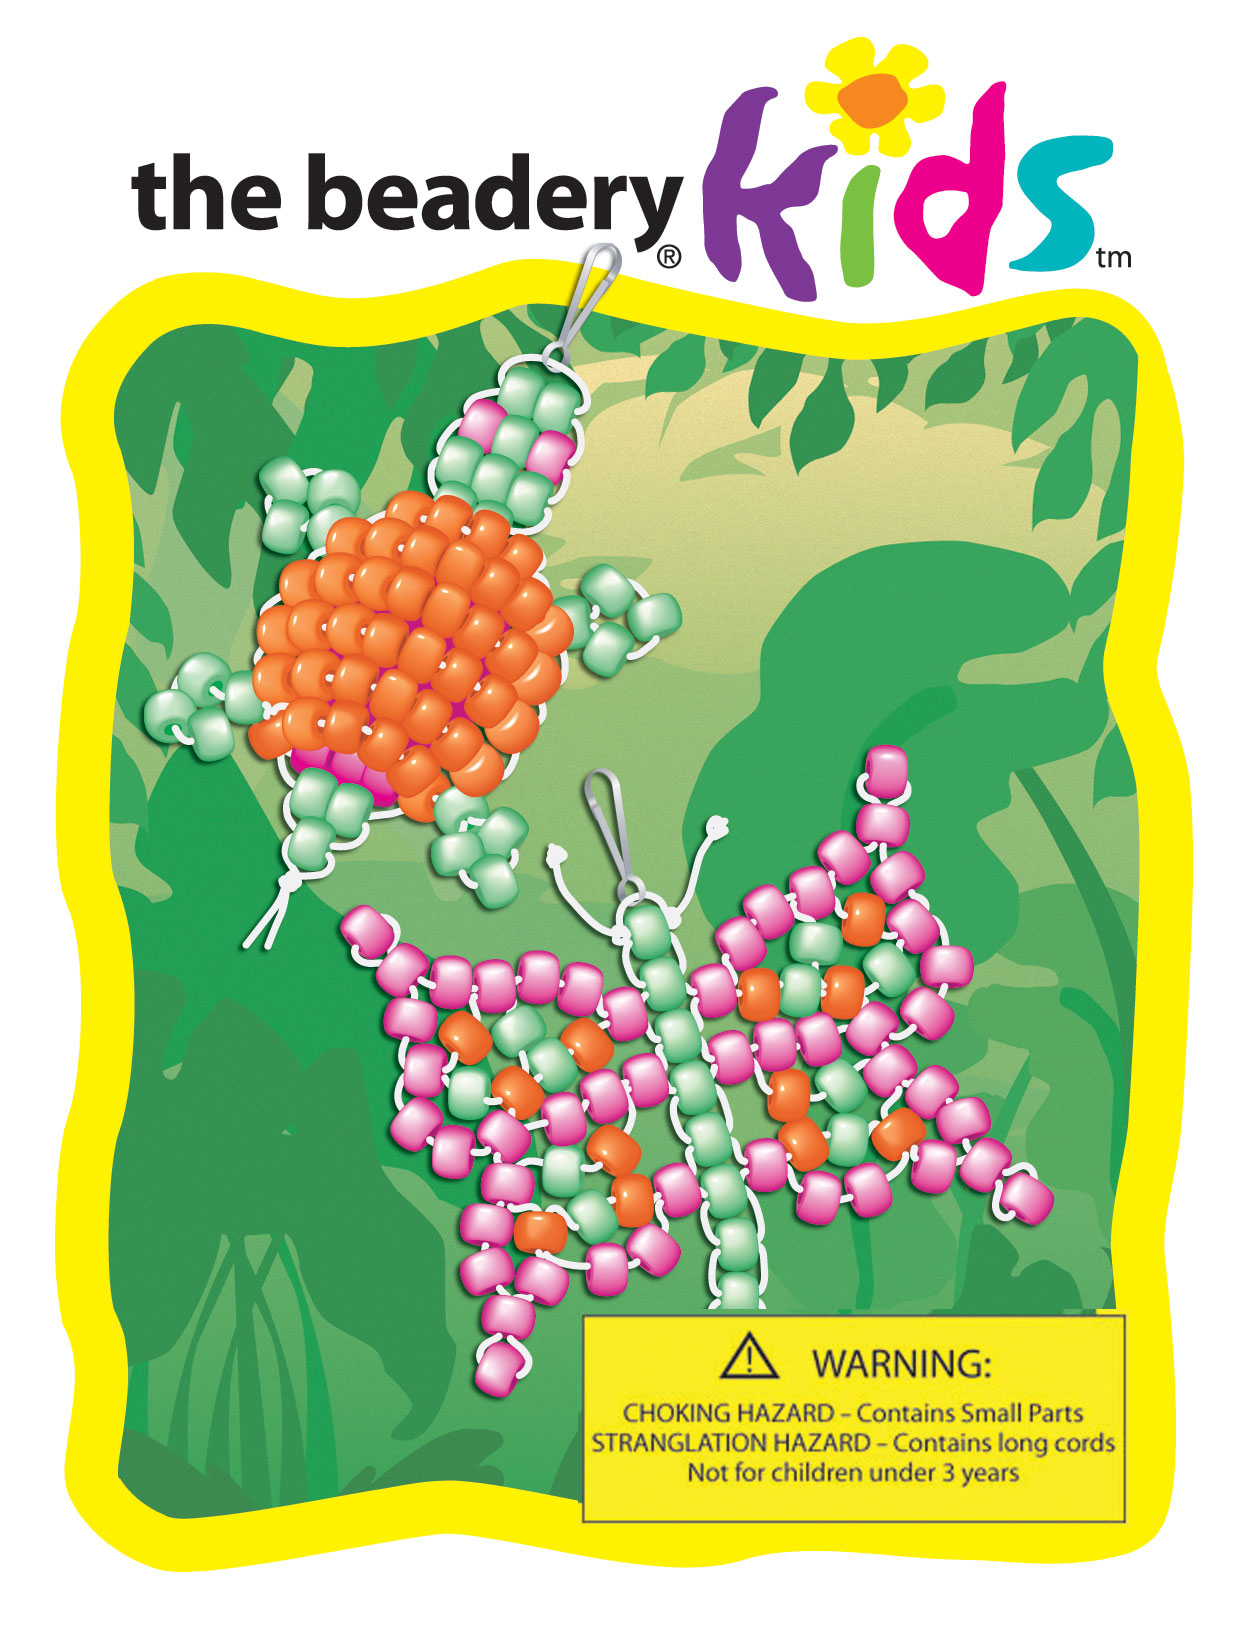 Everyday Beadery Vol. 2 – Featuring the Beady Buddies